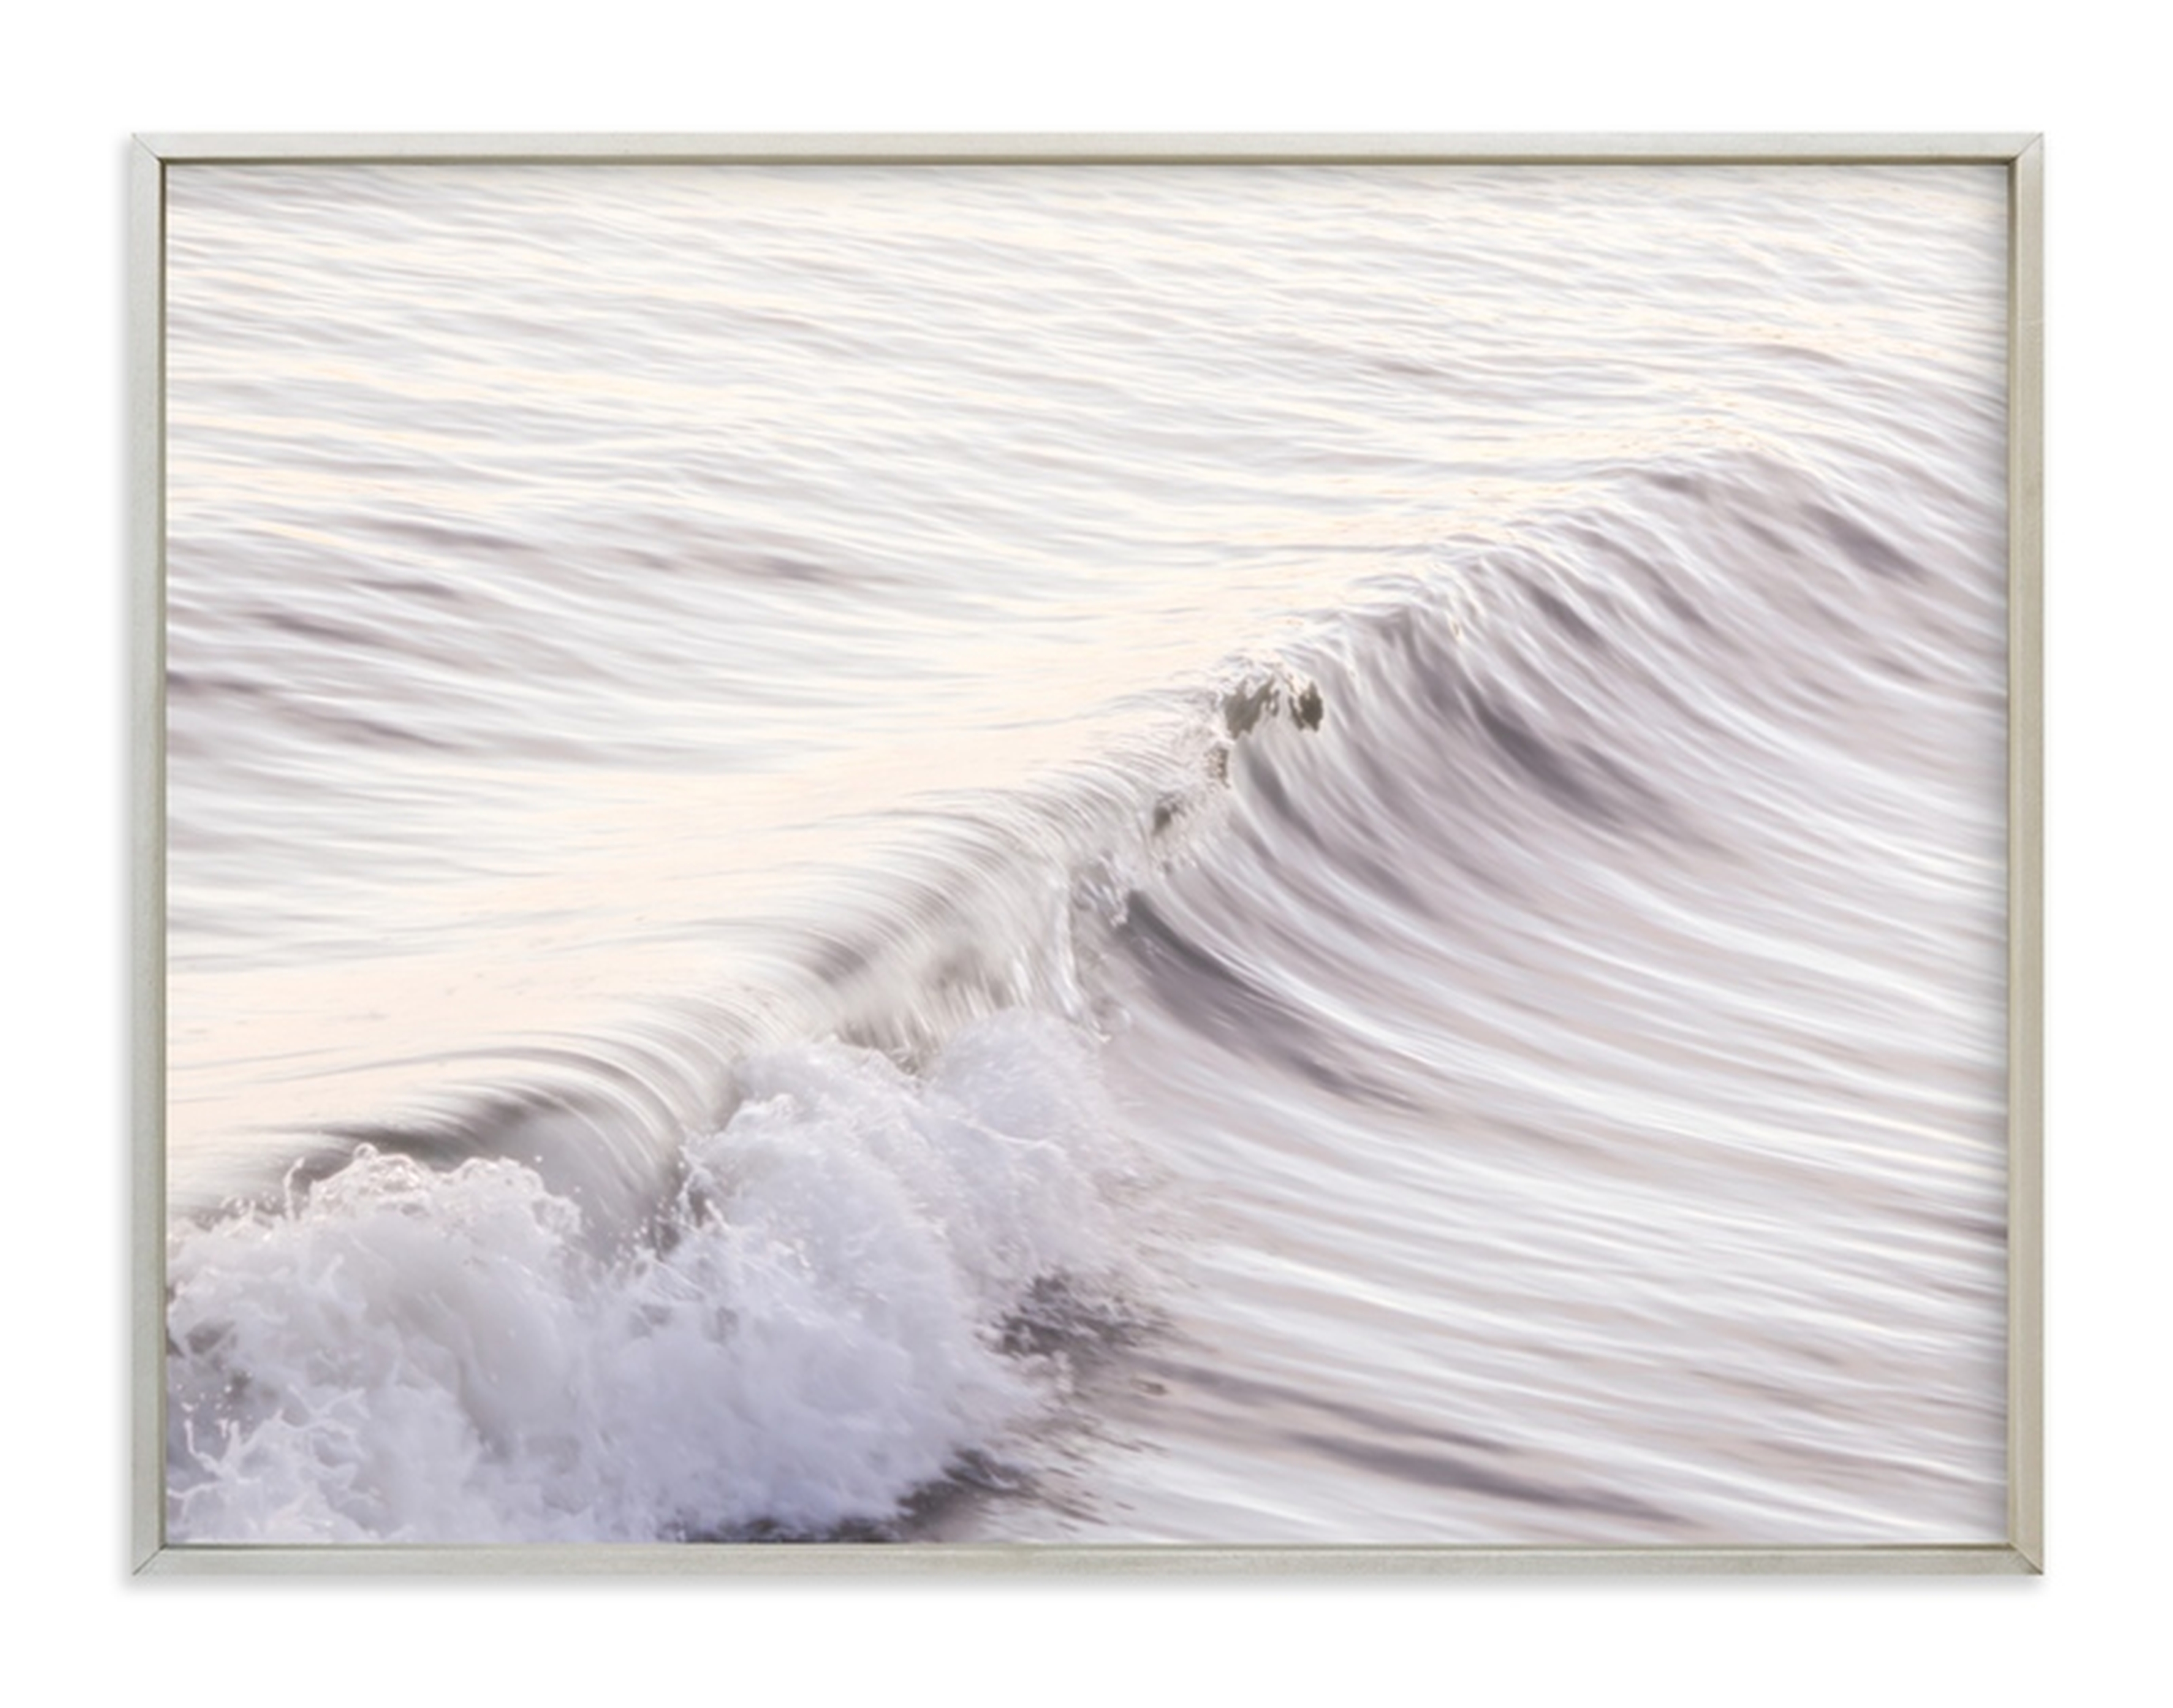 Cayucos Soft Waves - 40" x 30", champagne silver frame - Minted